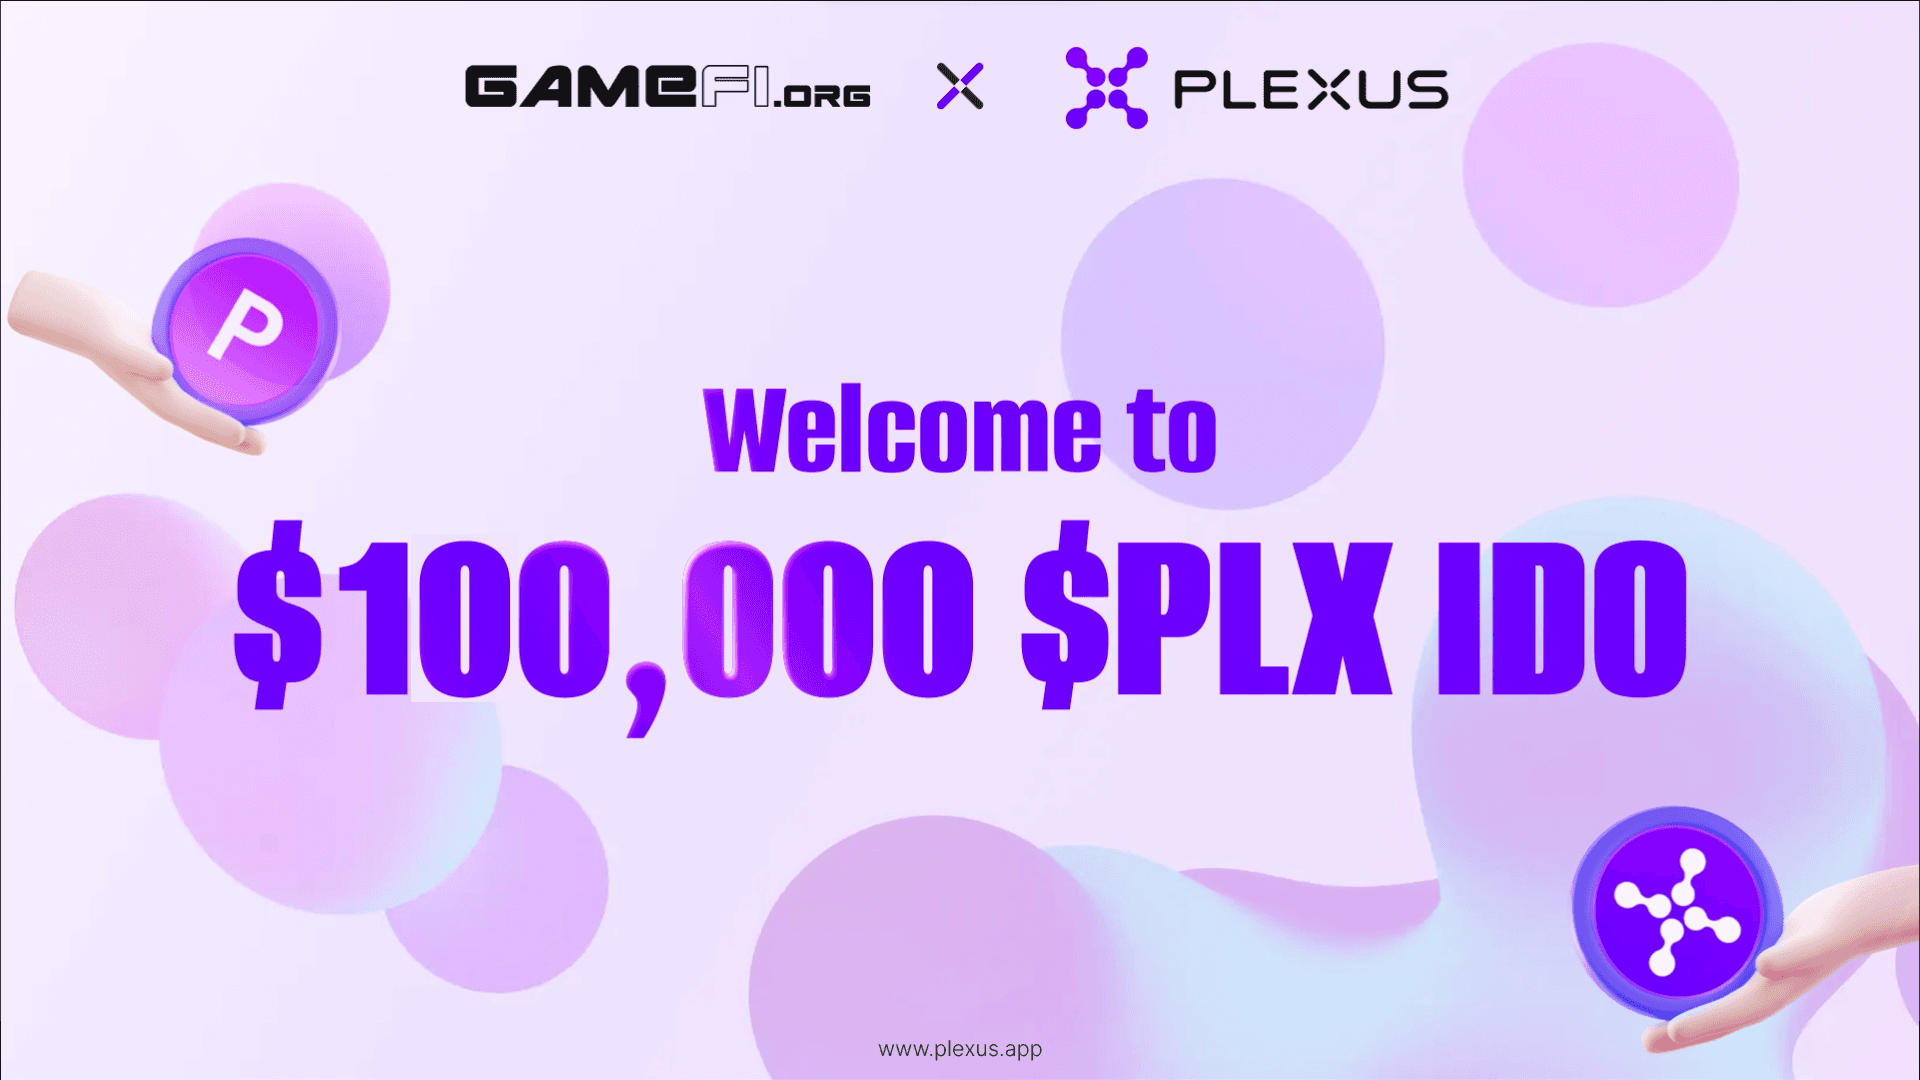 PLEXUS is launching a $100,000 IDO on GameFi.org, welcome to this amazing infrastructure!